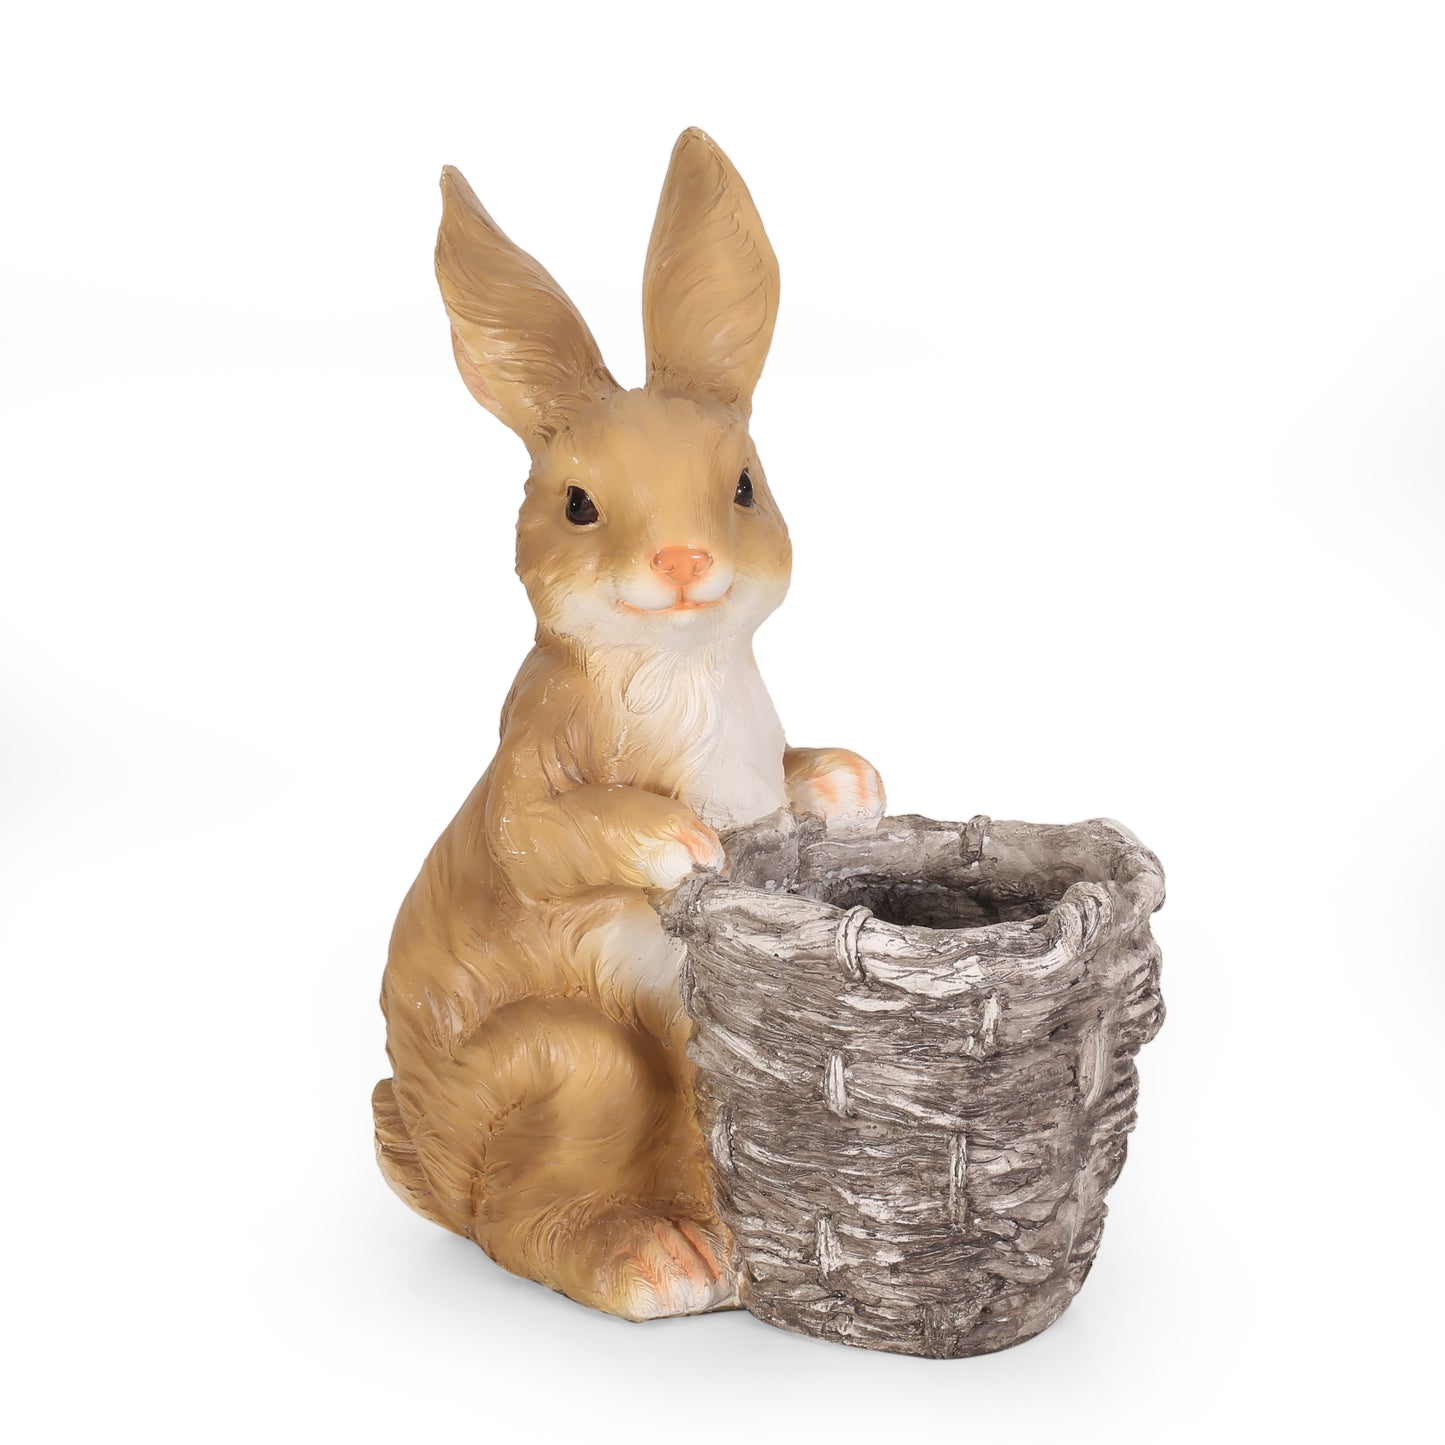 Intrare Outdoor Decorative Rabbit Planter, White and Brown